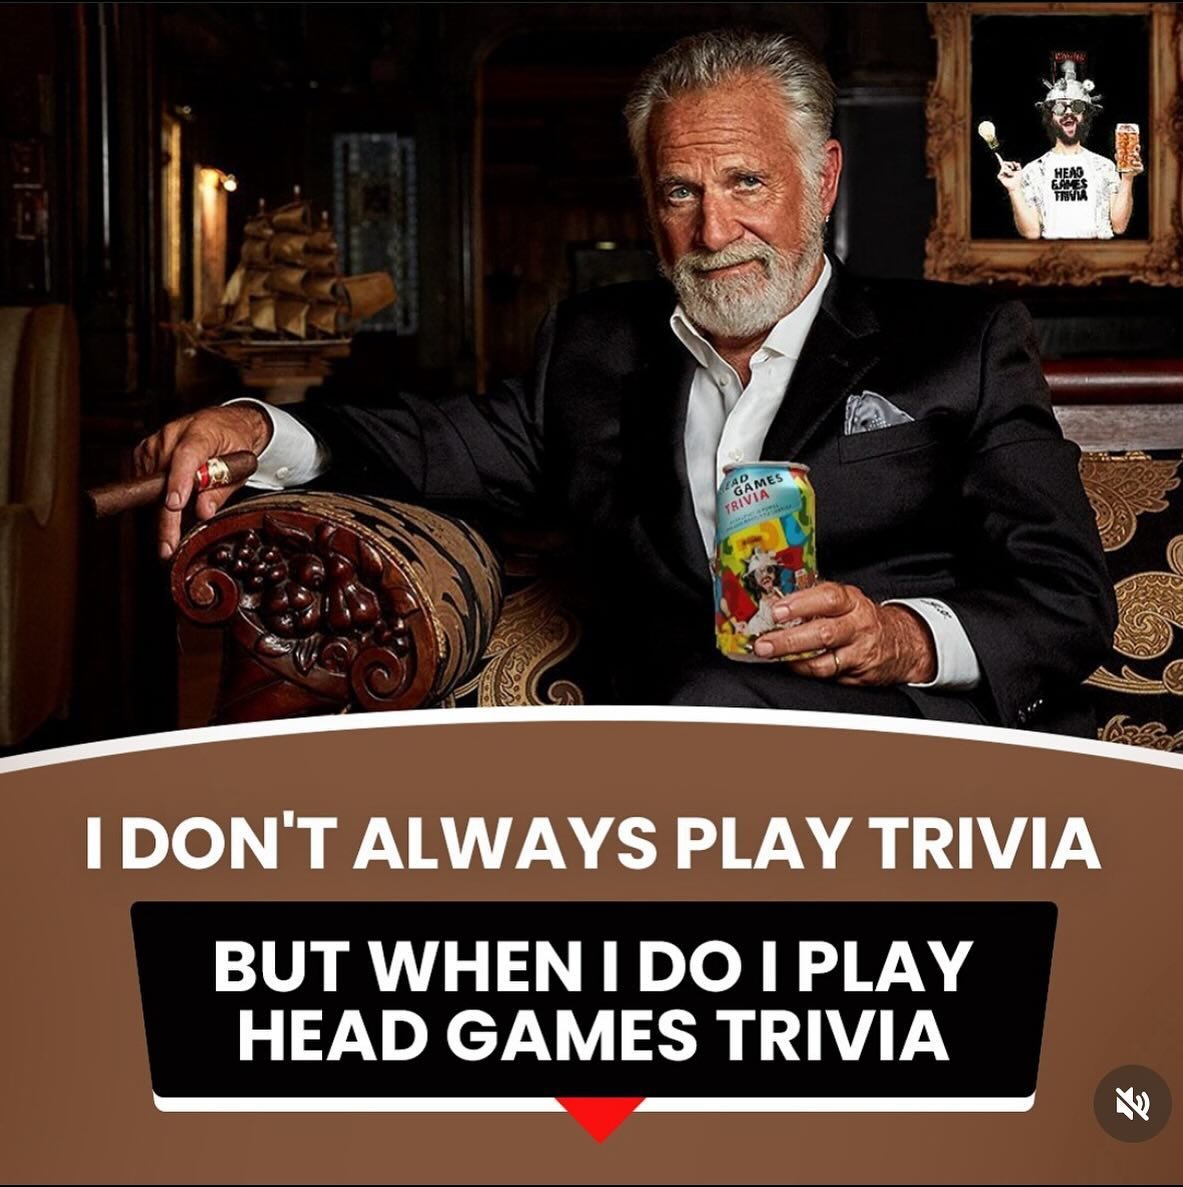 Trivia tonight at 6:30pm. Grab your funny, smart and fun friends and be ready for fun! @goodlandwafflesandmelts  at 5:30pm. 
.
.
.
#tuesdaytrivia #trivia #datrivia #goleta #goodlandfun #wafflesandbeer #waffleswaffleswaffles #triviaandbeer